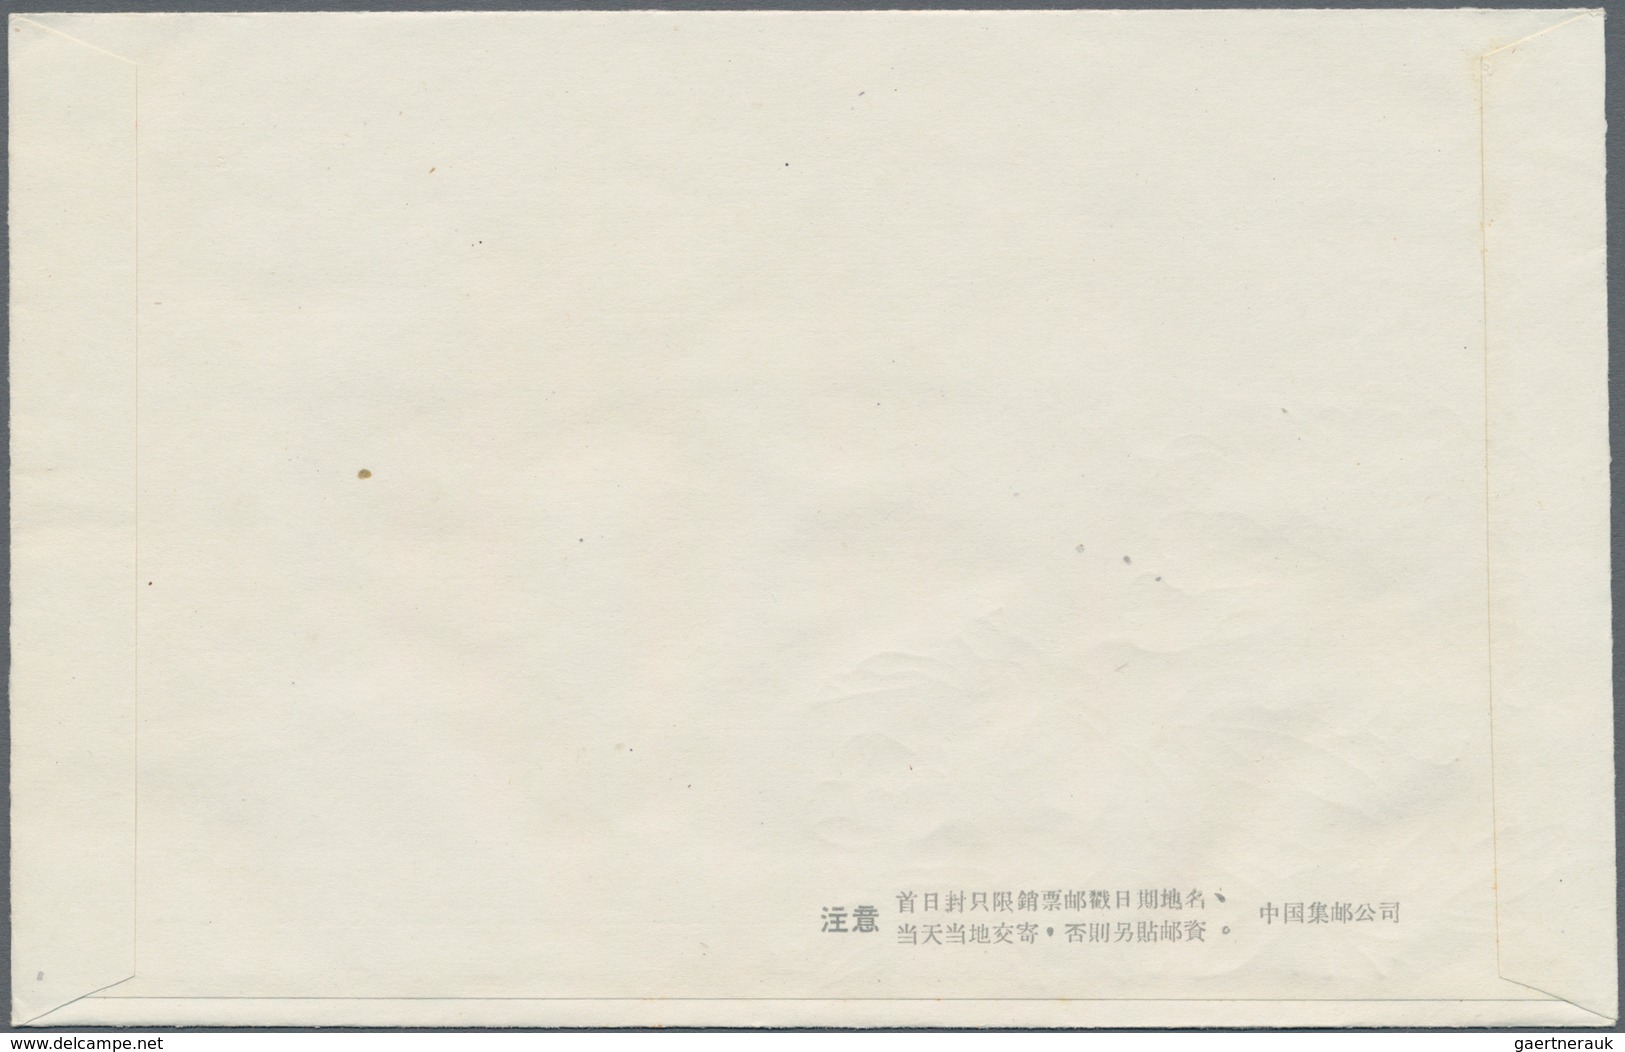 China - Volksrepublik: 1964, Chinese Peonies (S61), 3 Official FDCs Bearing The Full Set, Tied By Fi - Other & Unclassified